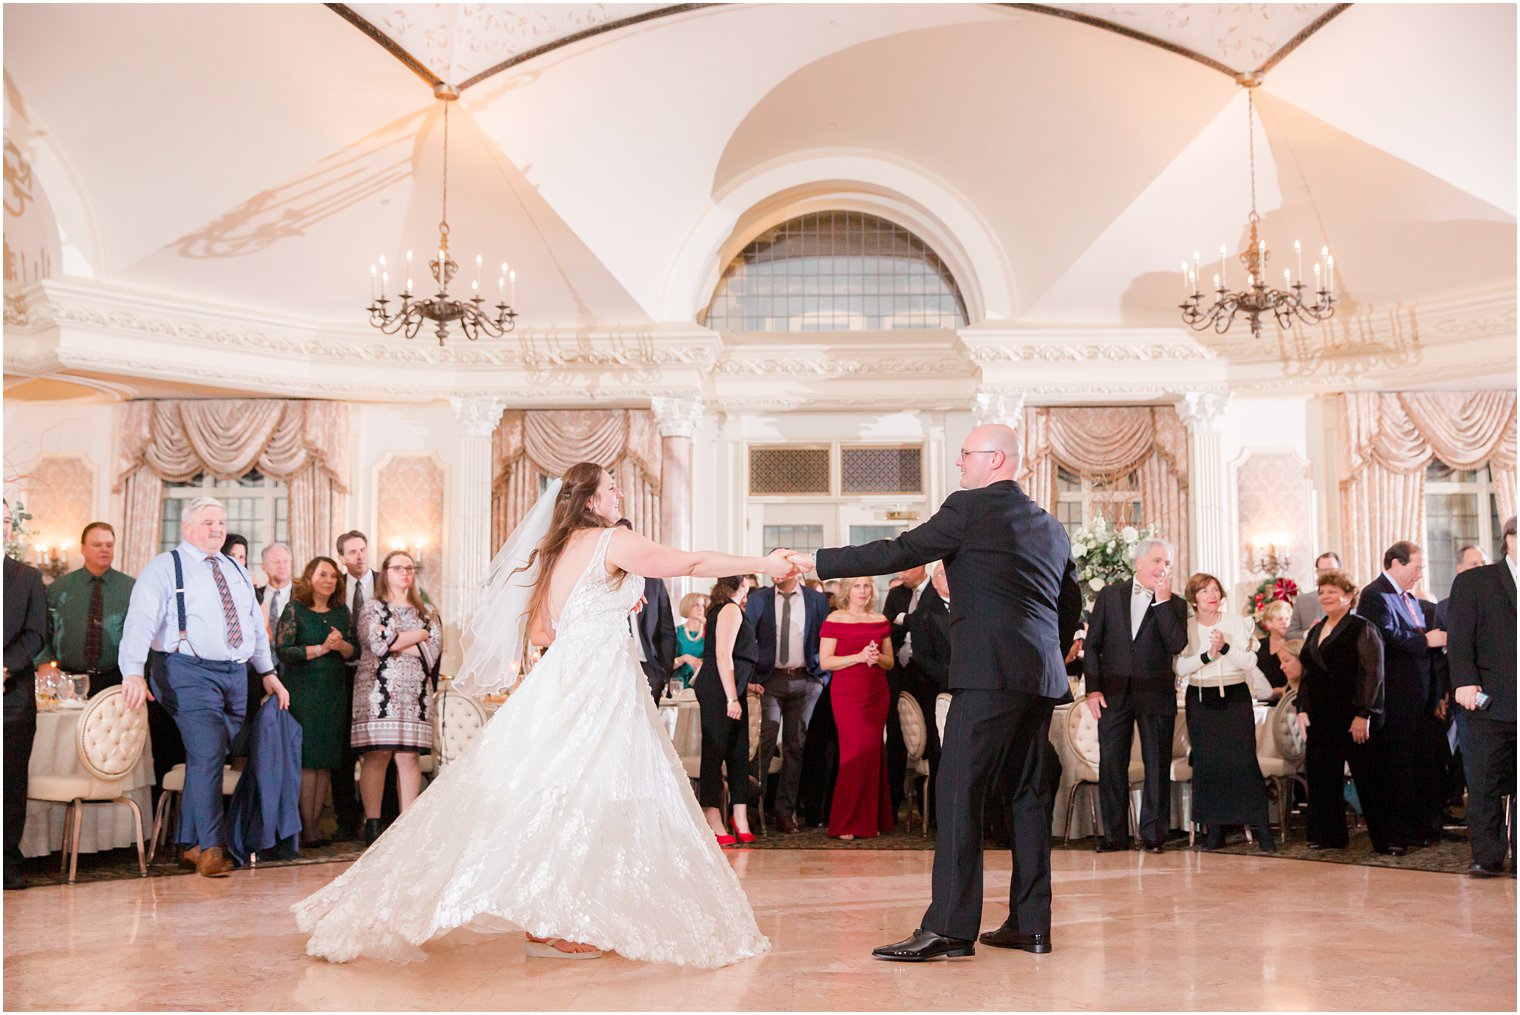 bride and groom's first dance during their wedding reception at Pleasantdale Chateau